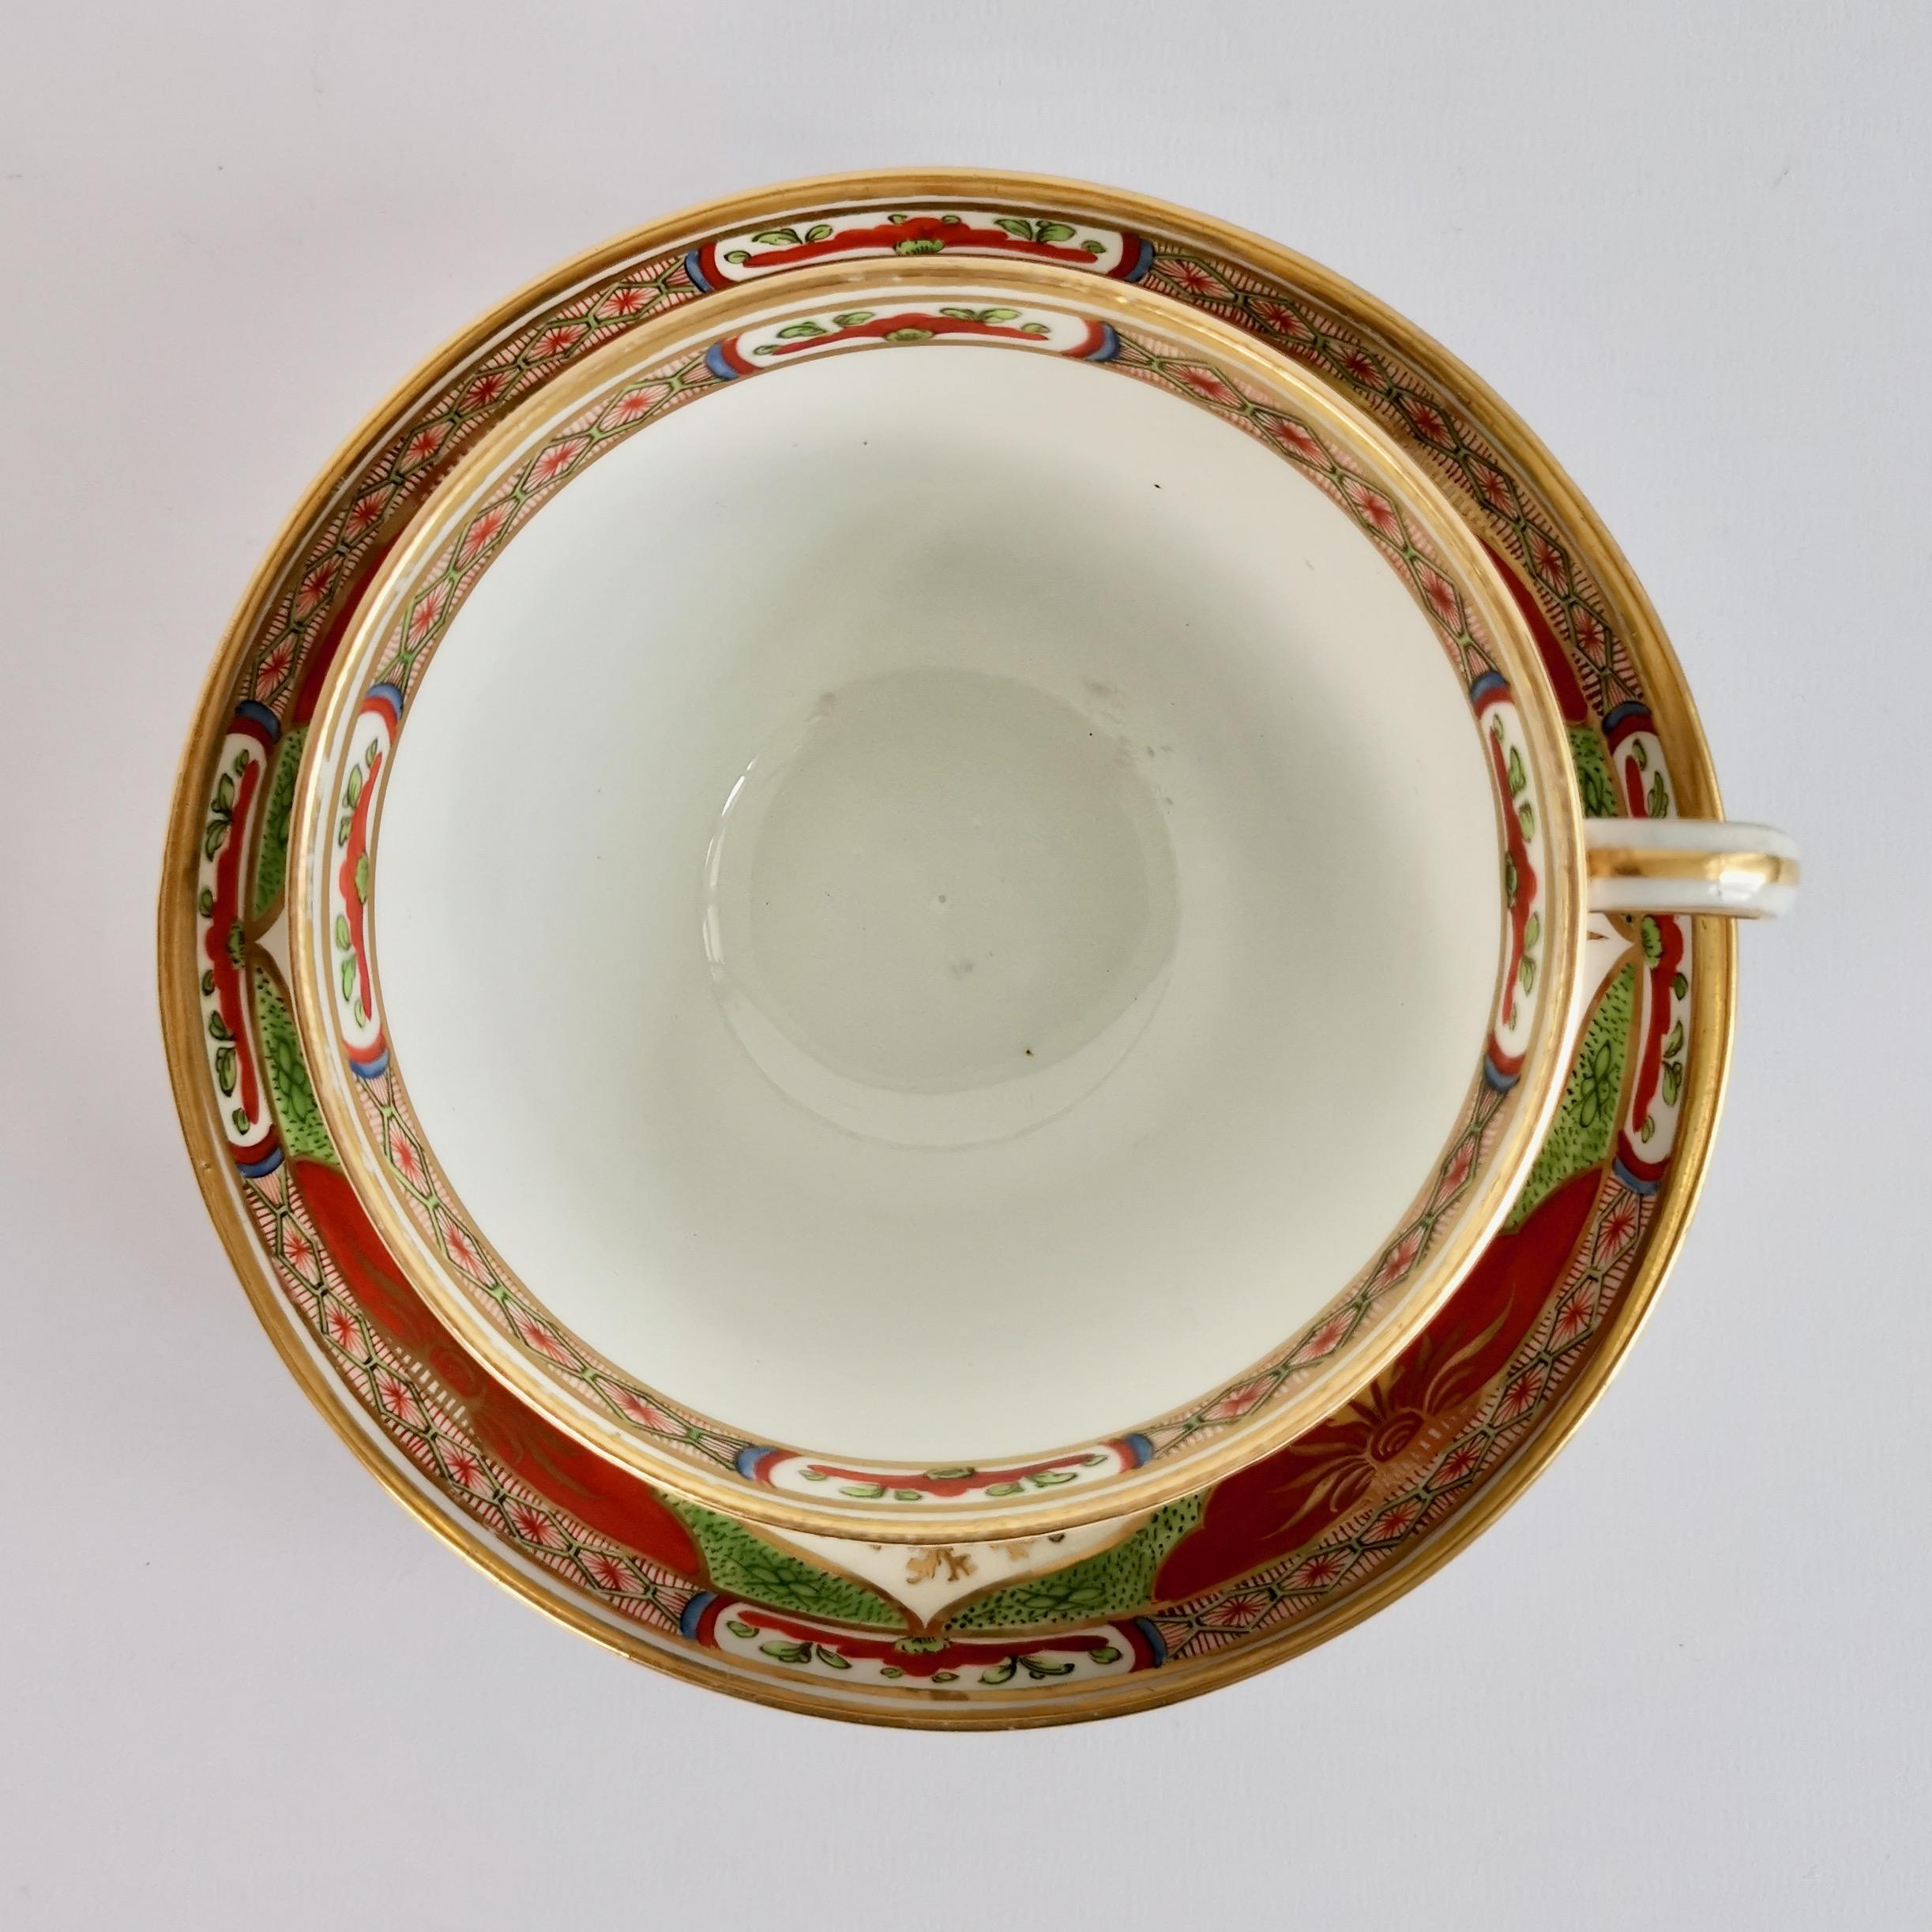 Chamberlains Worcester Porcelain Breakfast Cup, Dragons in Compartments, Ca 1800 7